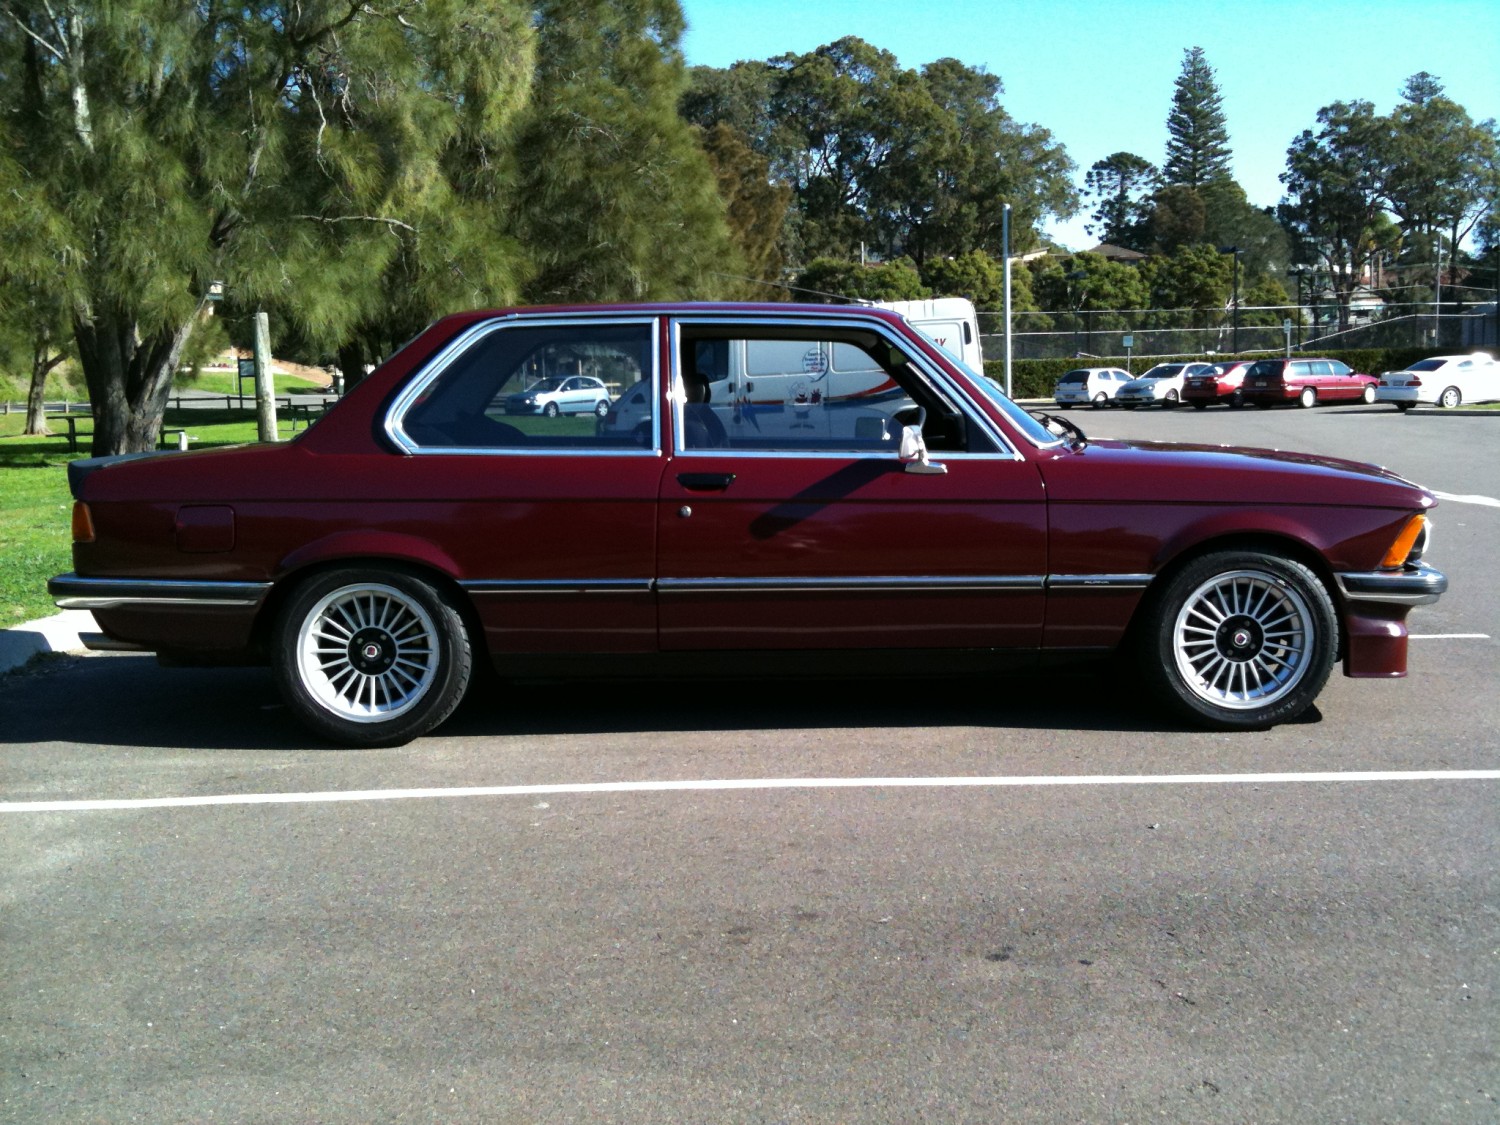 1977 BMW E21 - BMBruce - Shannons Club